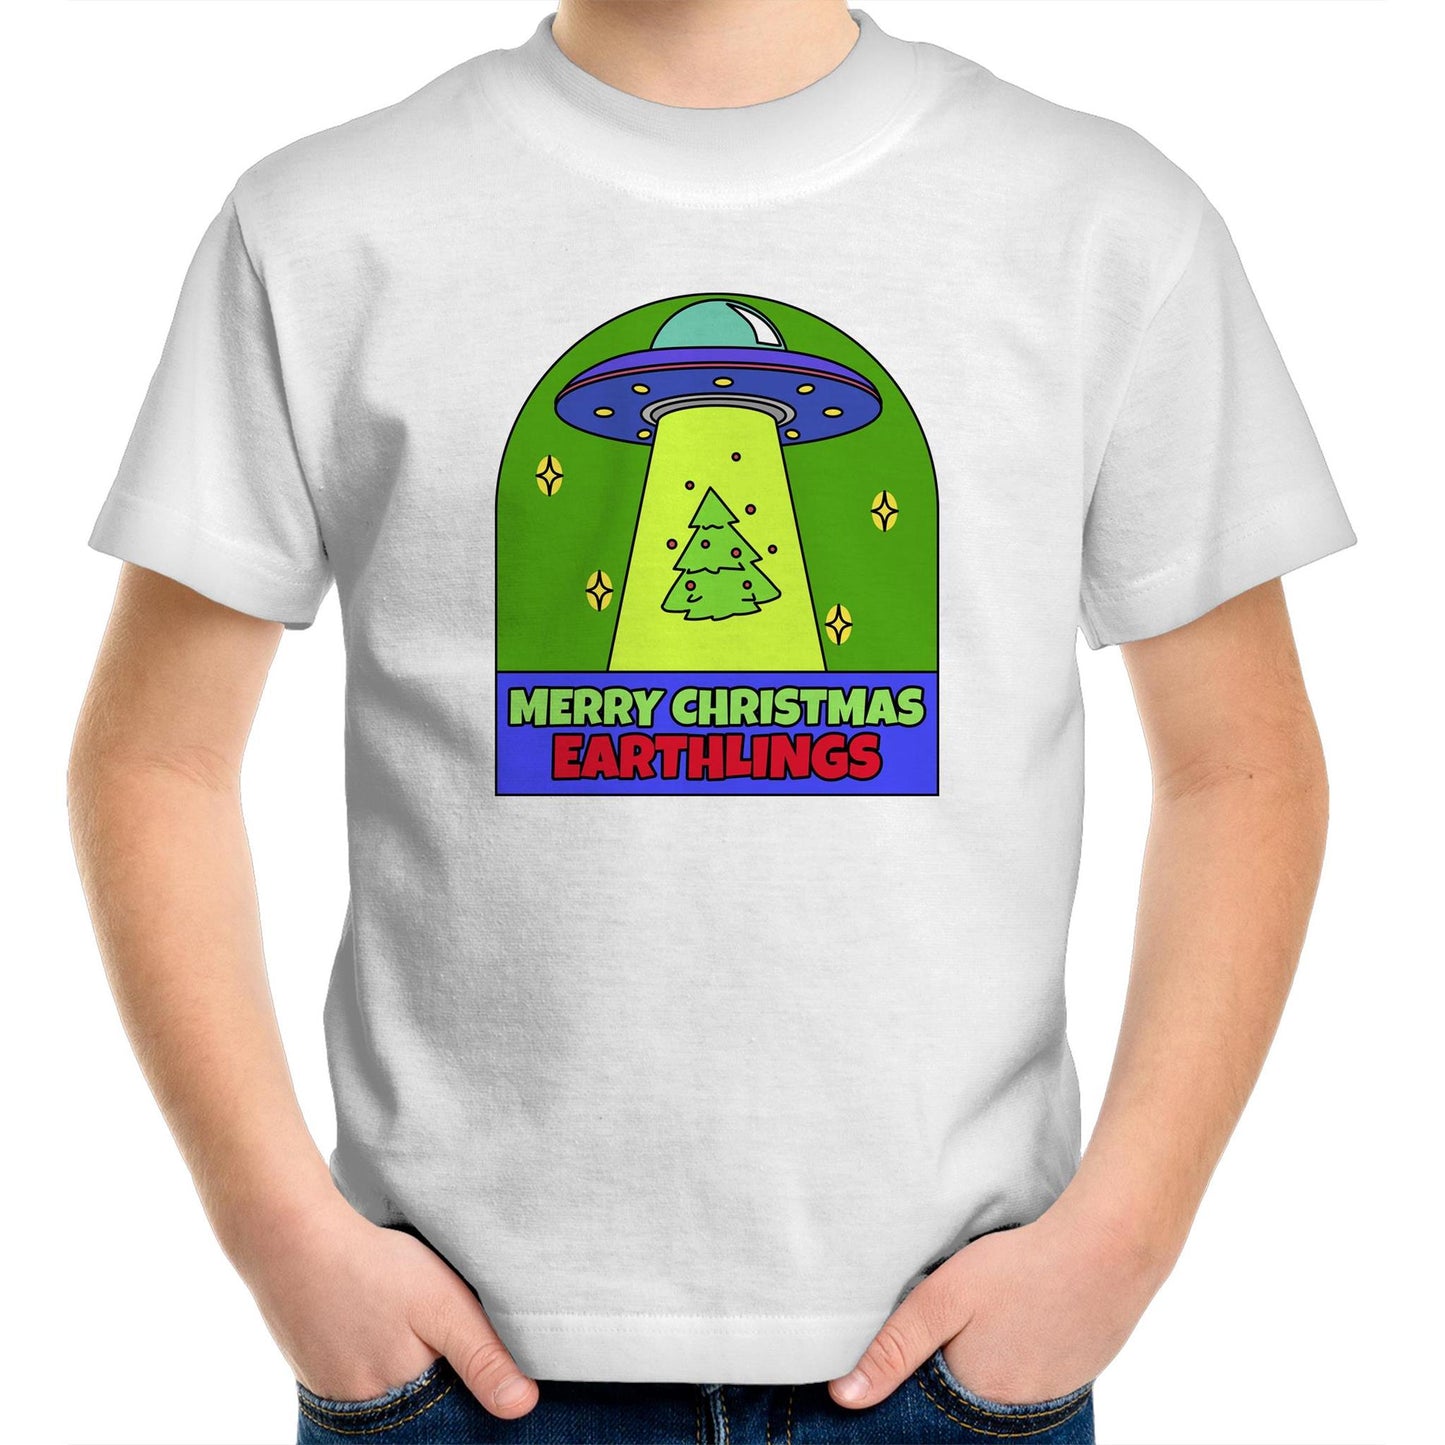 Merry Christmas Earthlings, UFO - Kids Youth T-Shirt White Christmas Kids T-shirt Merry Christmas